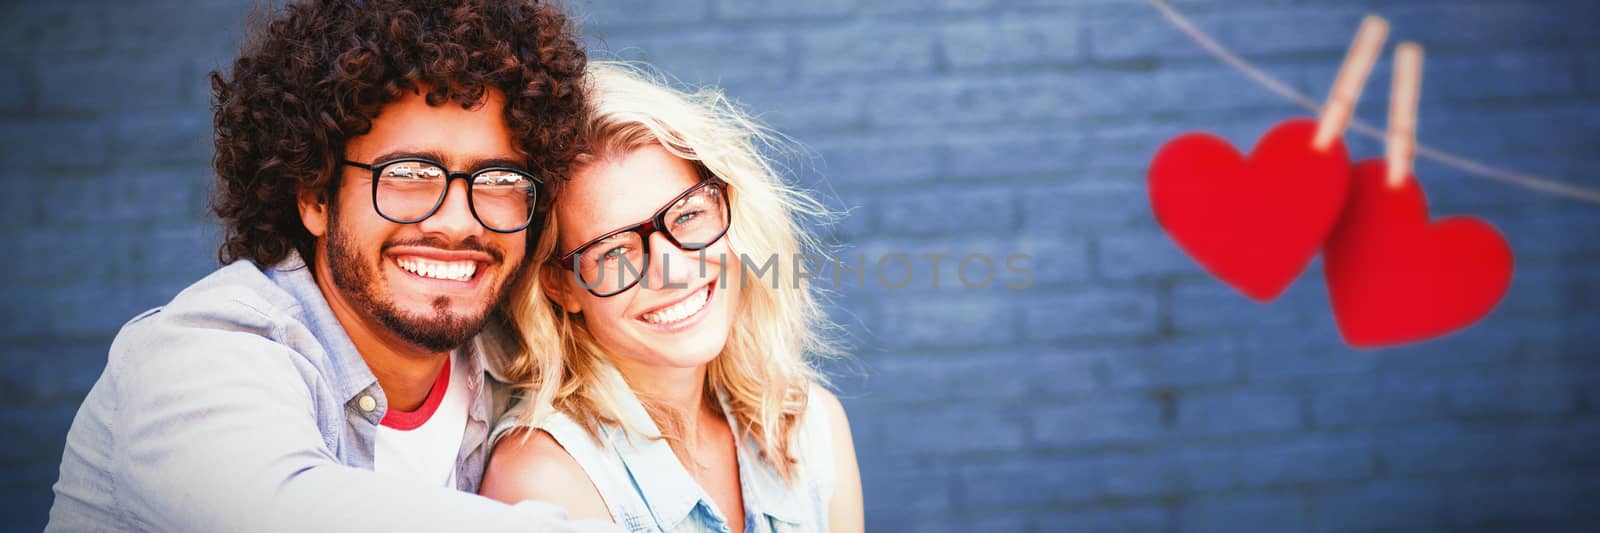 Hearts hanging on a line against portrait of young couple in spectacles